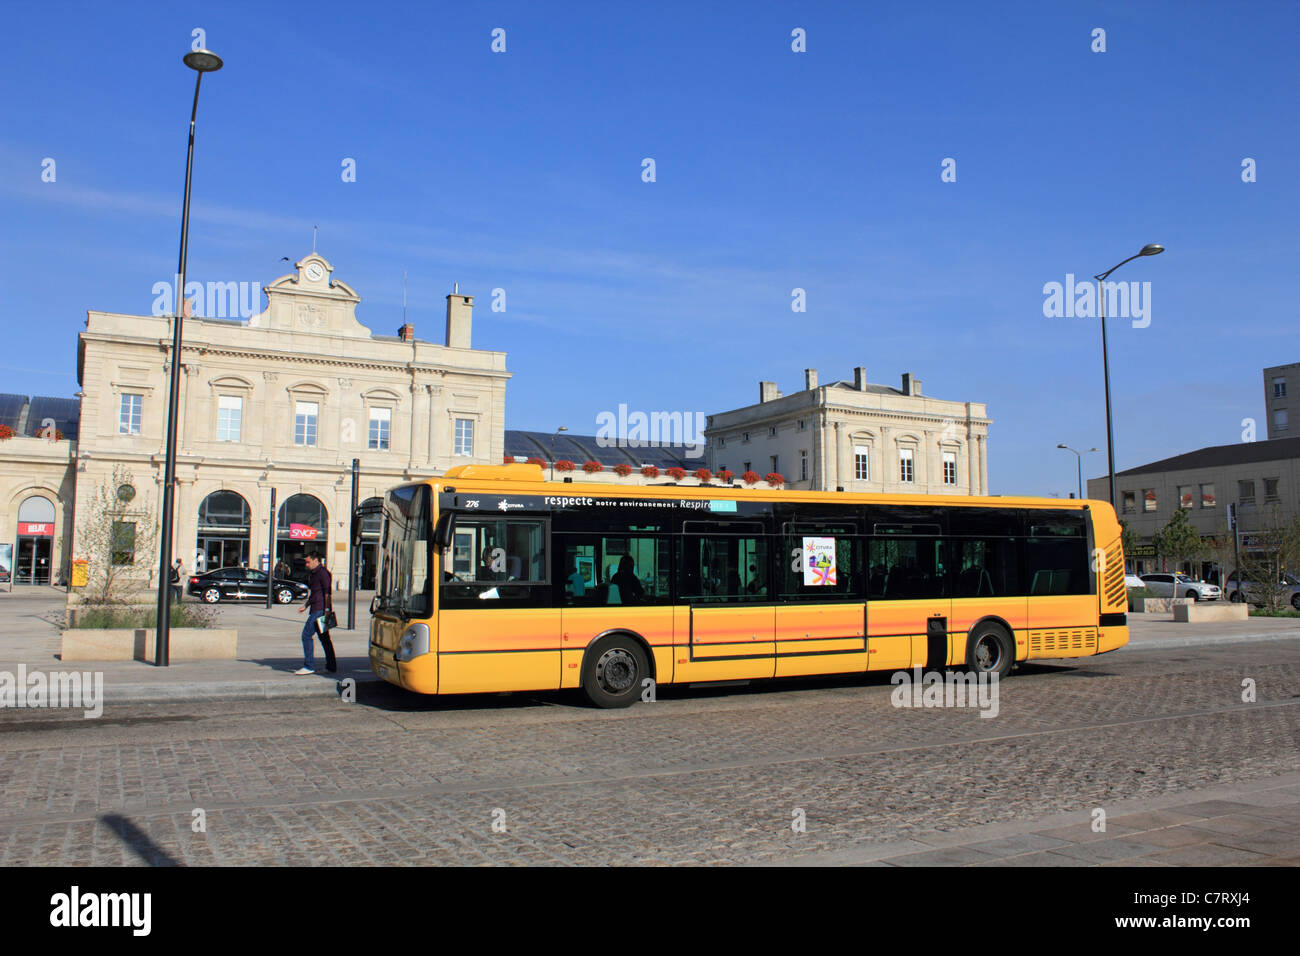 Yellow bus outside train station in Reims in the Champagne-Ardenne region of France Stock Photo